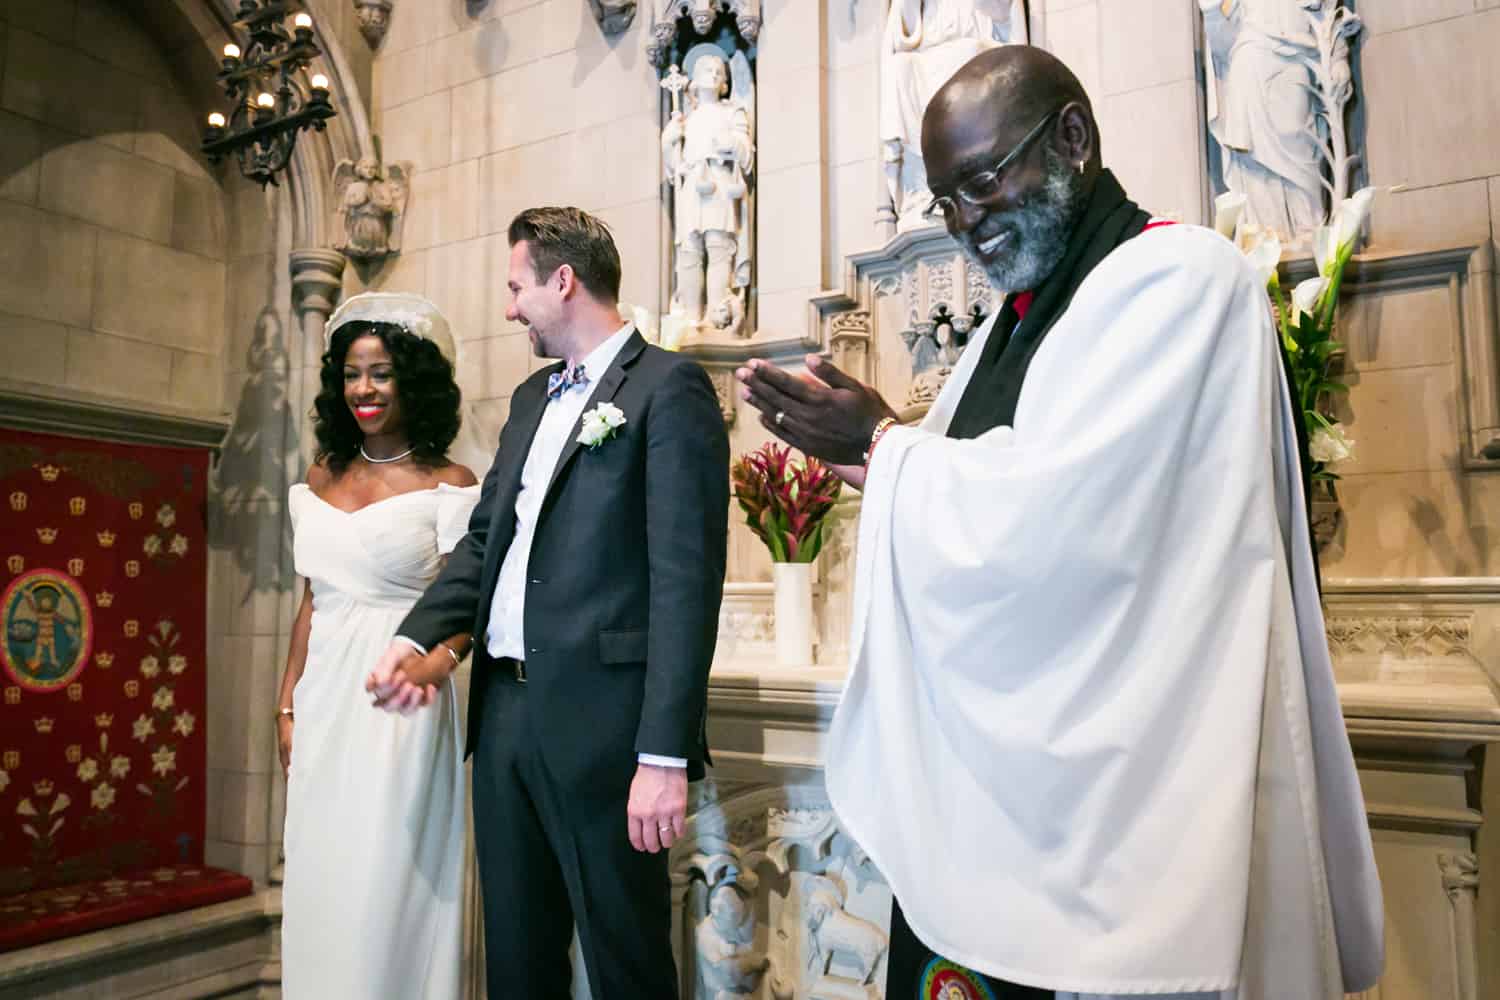 Priest clapping for bride and groom during Trinity Church wedding ceremony